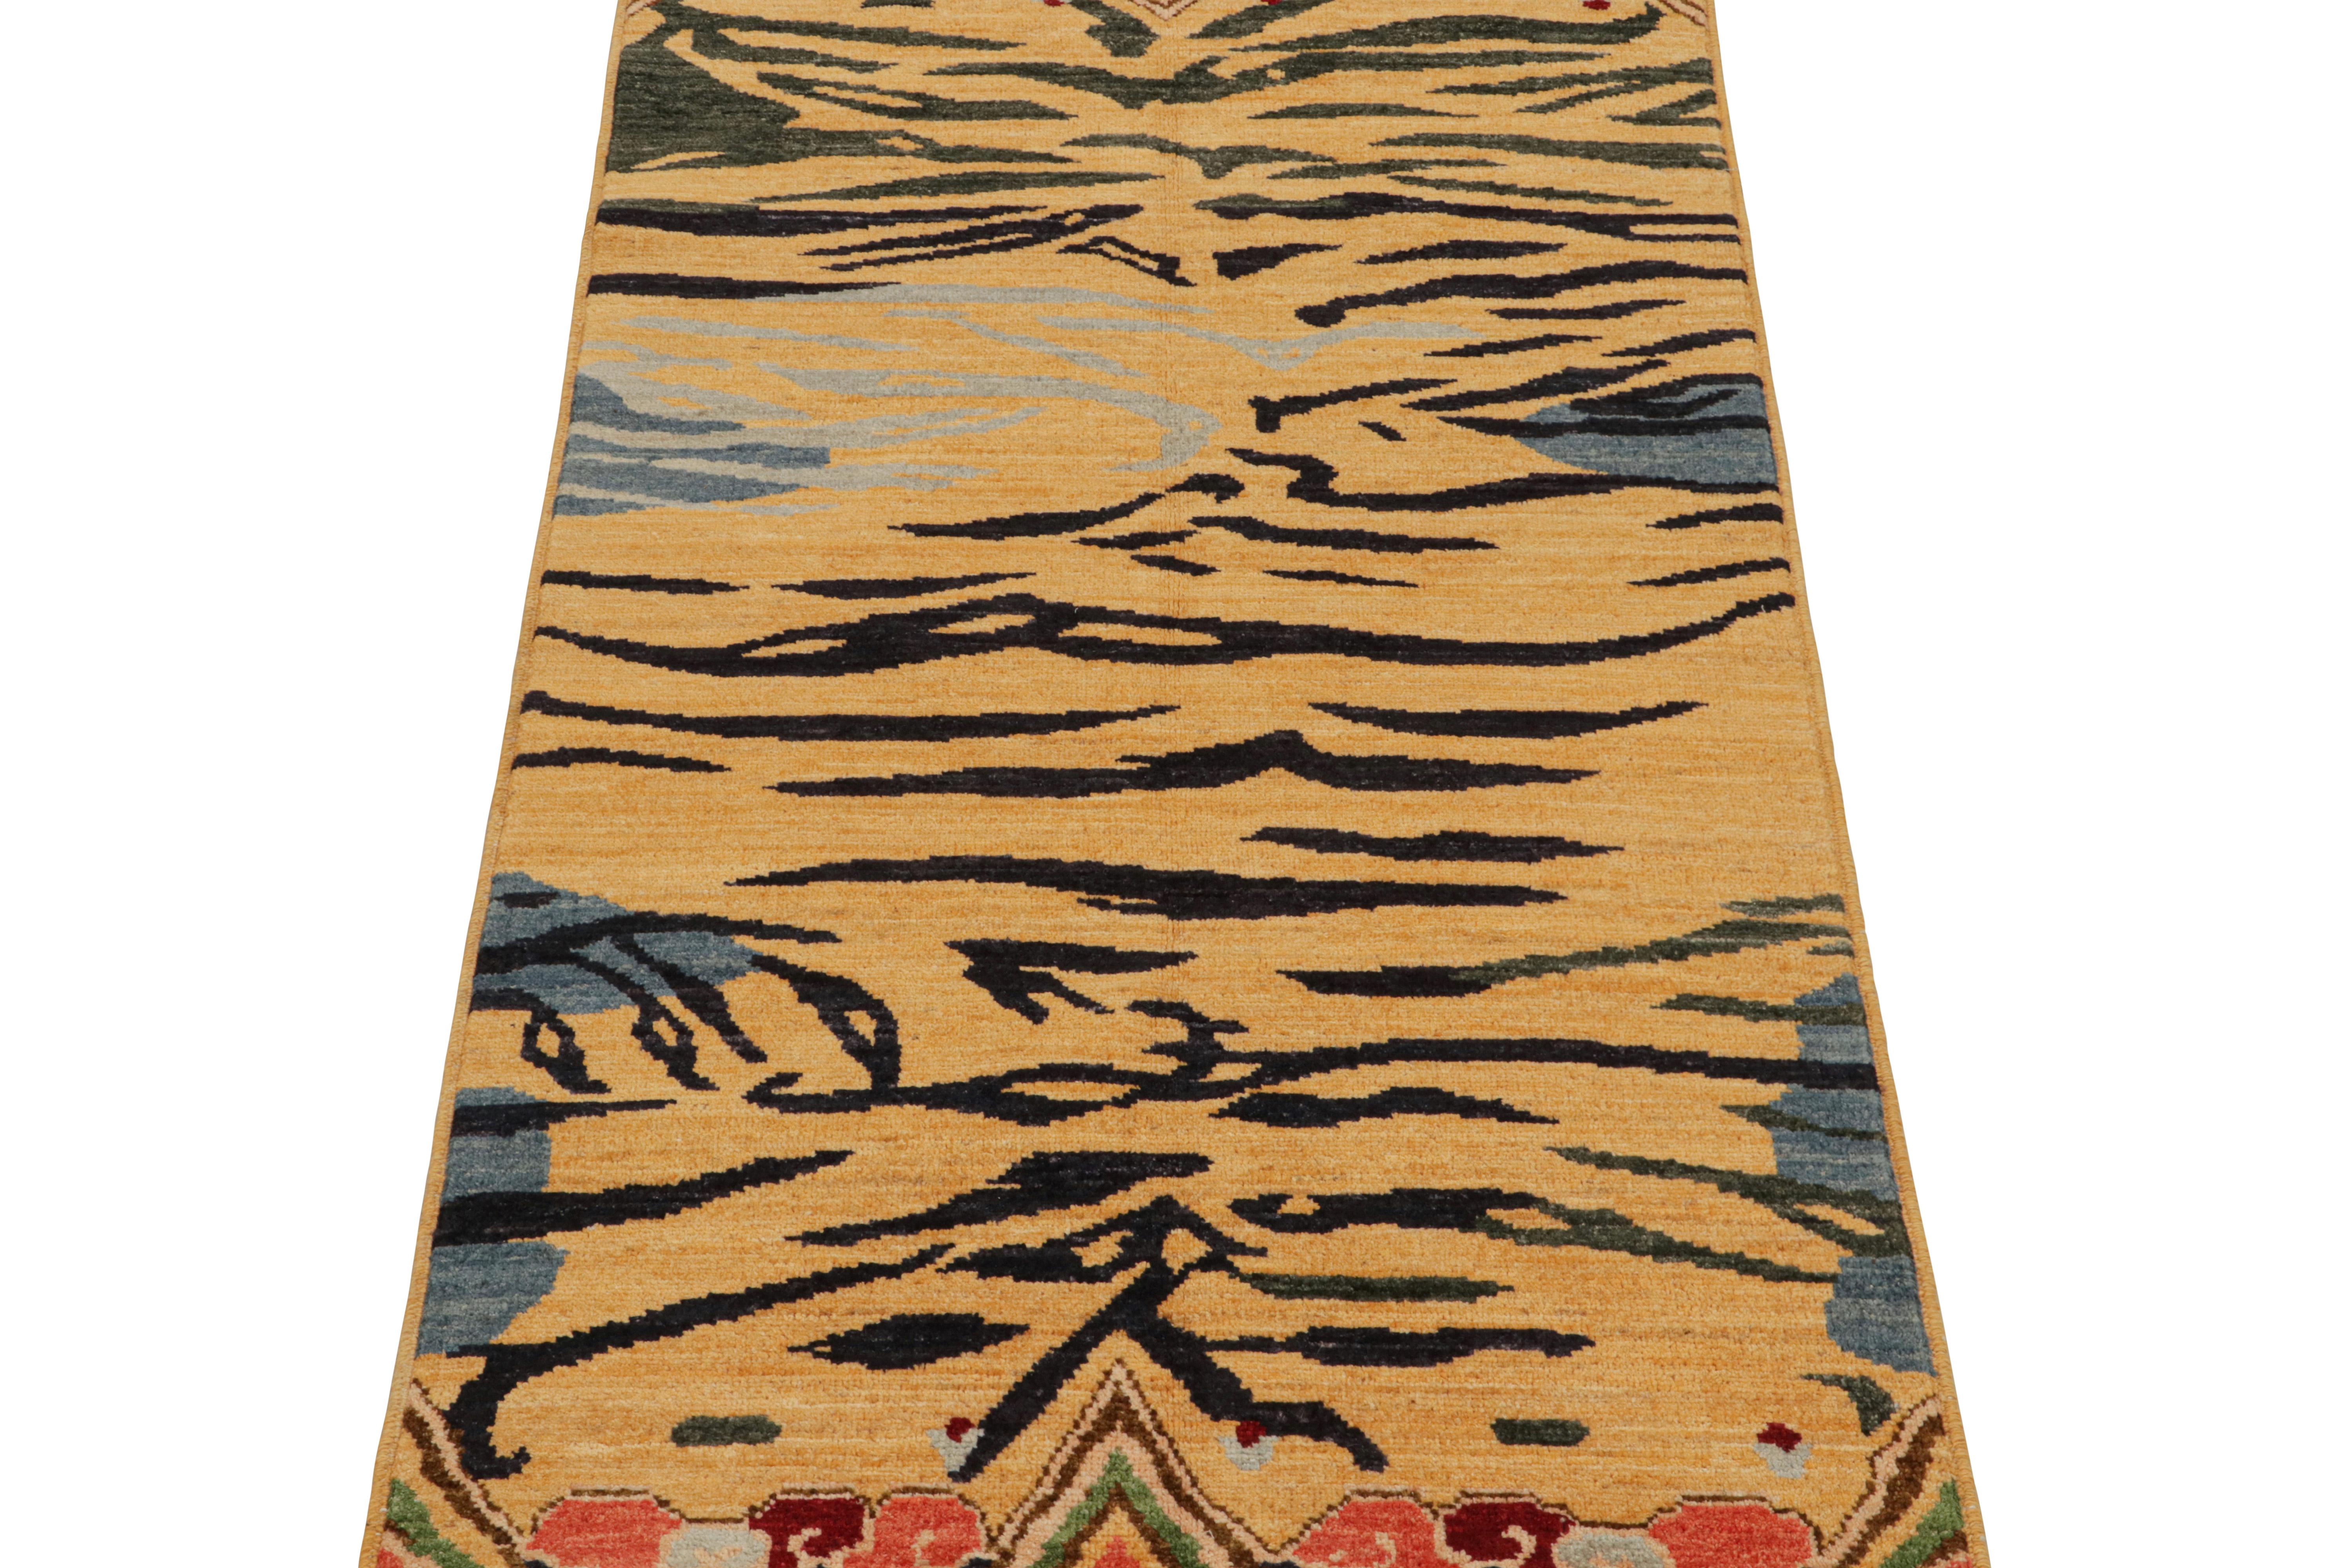 Tapis & Kilim's Classic Style Tiger-Skin Runner in Gold with Gray and Blue Stripes (Tapis & Kilim's Classic Style Tiger-Skin Runner in Gold with Gray and Blue Stripes) Neuf - En vente à Long Island City, NY